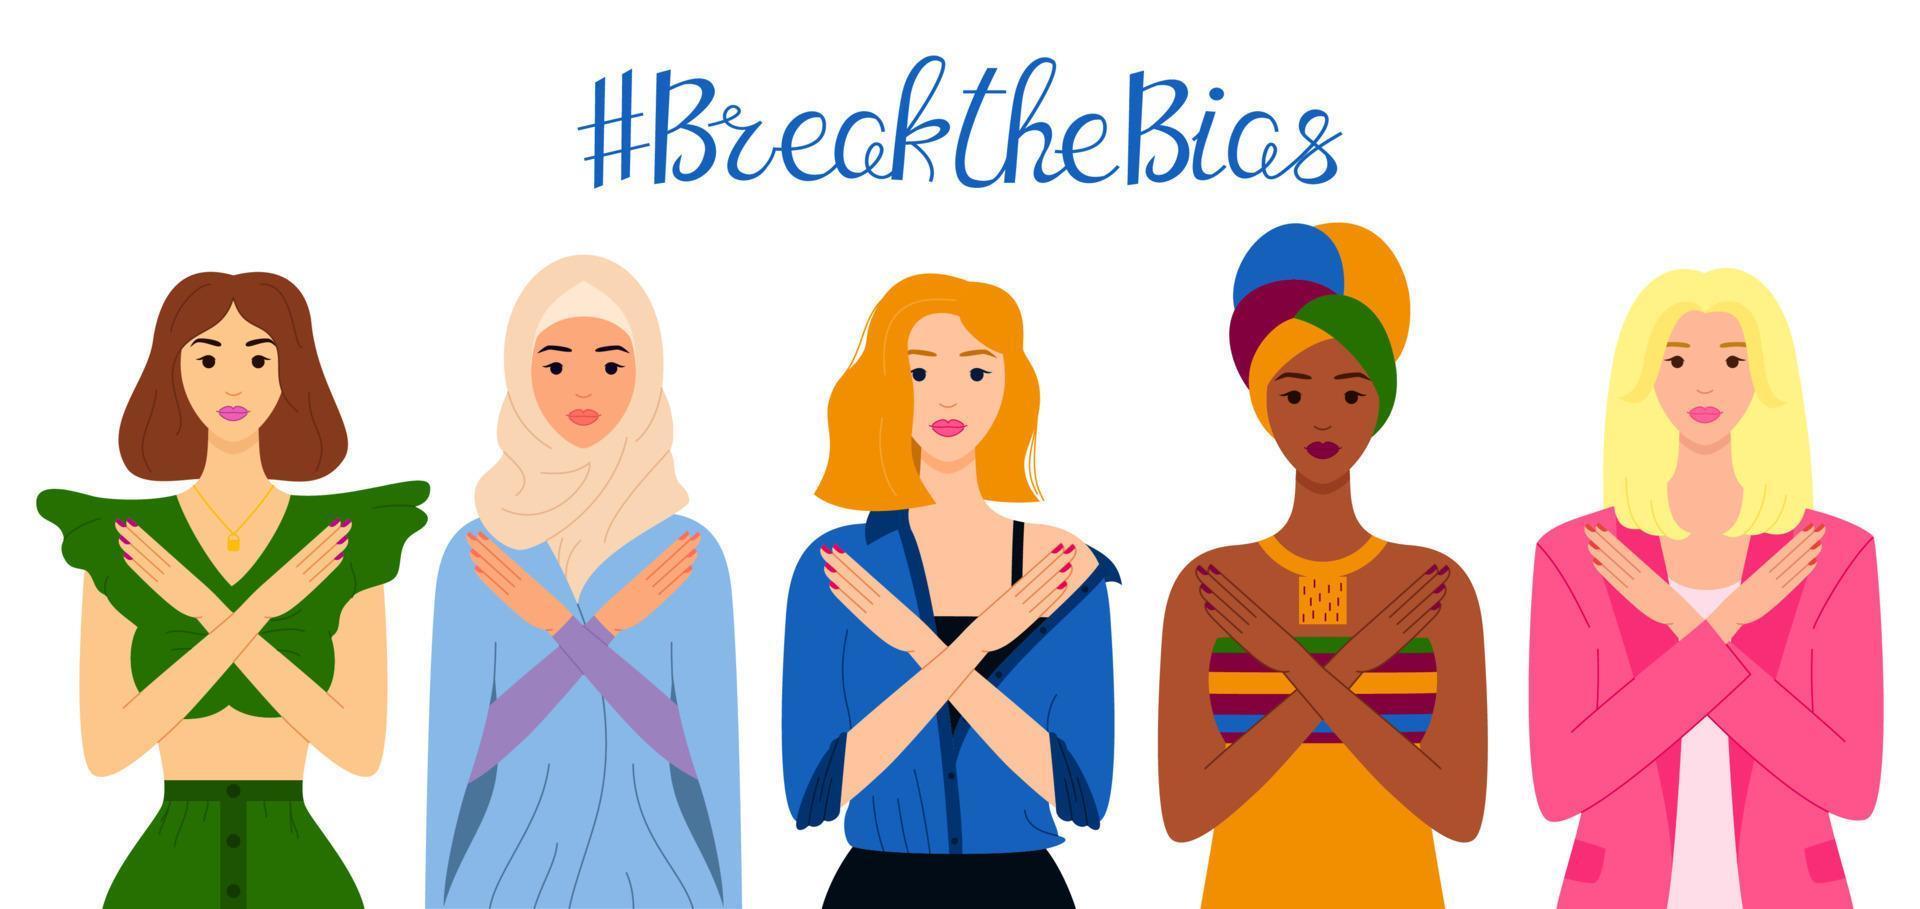 Break the bias. Women of different ethnic group crossed their arms. International Women's Day horizontal banner. Gesture of refusal and prohibition. Campaign against stereotypes, violence, inequality vector